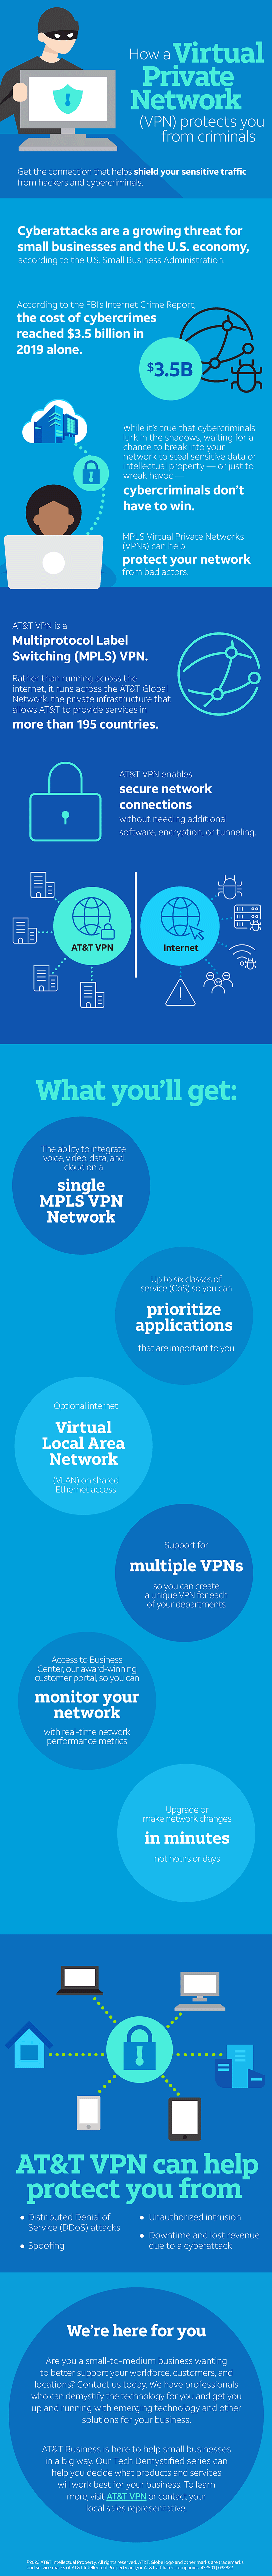 How a Virtual Private Network (VPN) protects you from criminals infographic